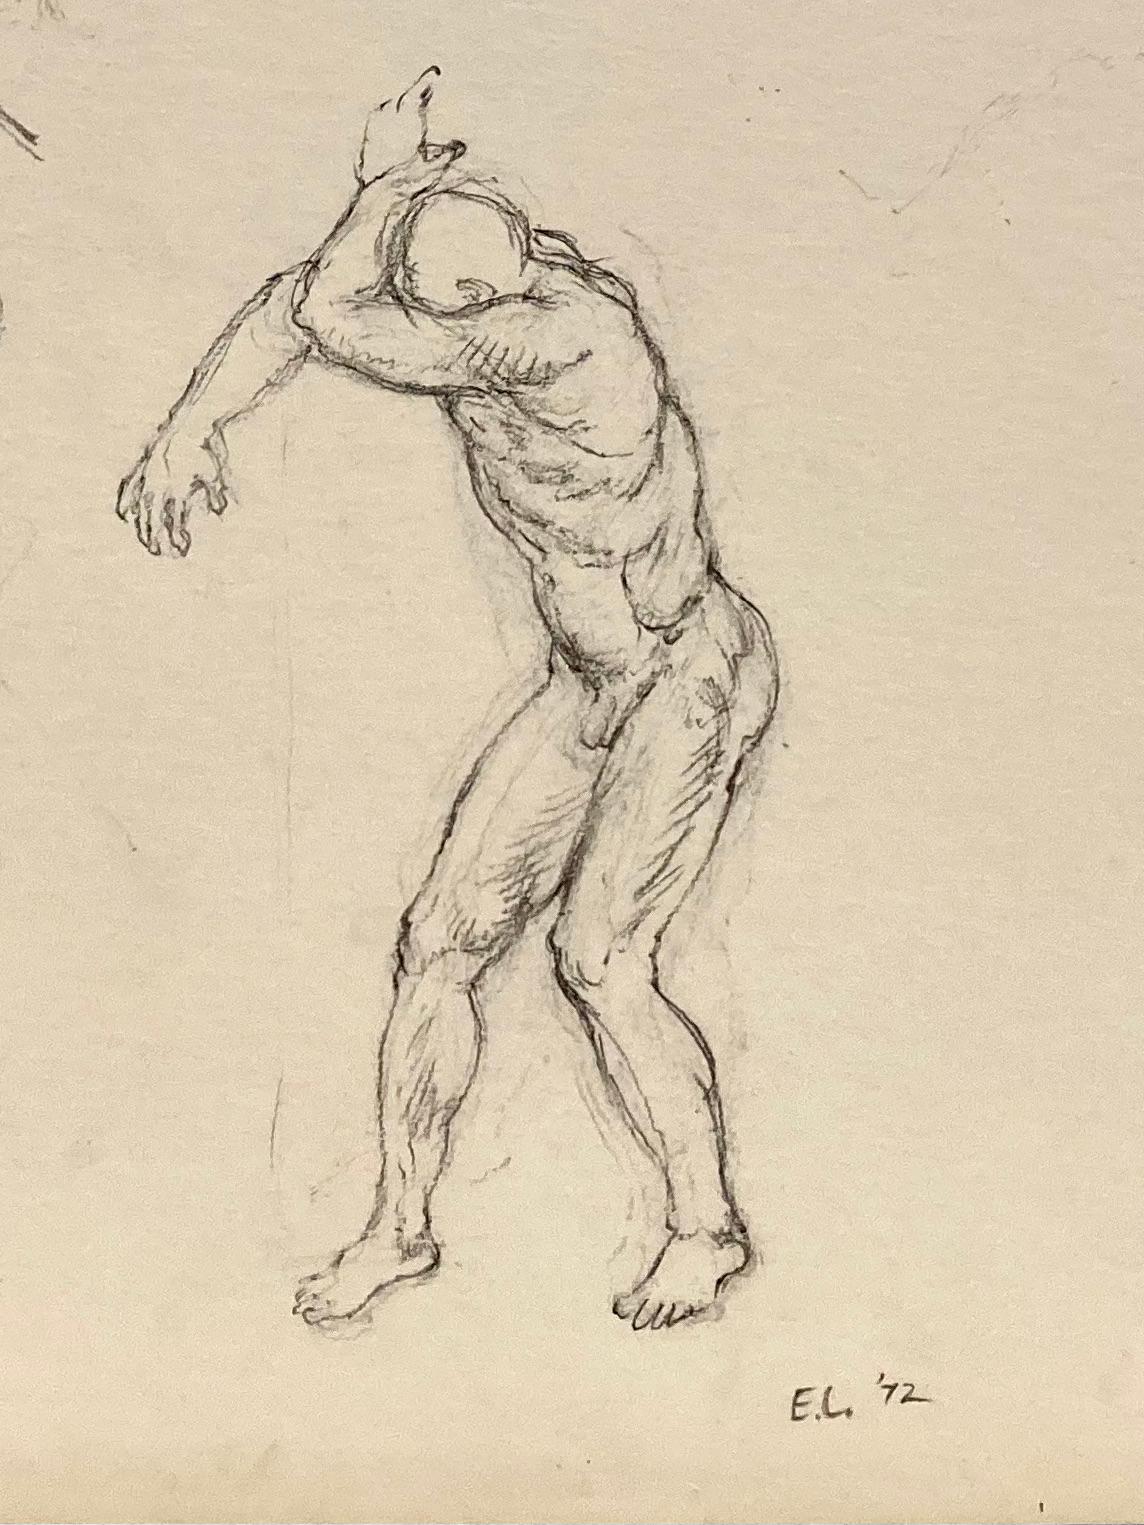 This pencil drawing by master draughtsman Edward Laning has religious over tones. Perhaps it's a study for a deposition. There are male figures, both nude and clothed, one on a ladder, and at the lower left a figure seems to be carrying something